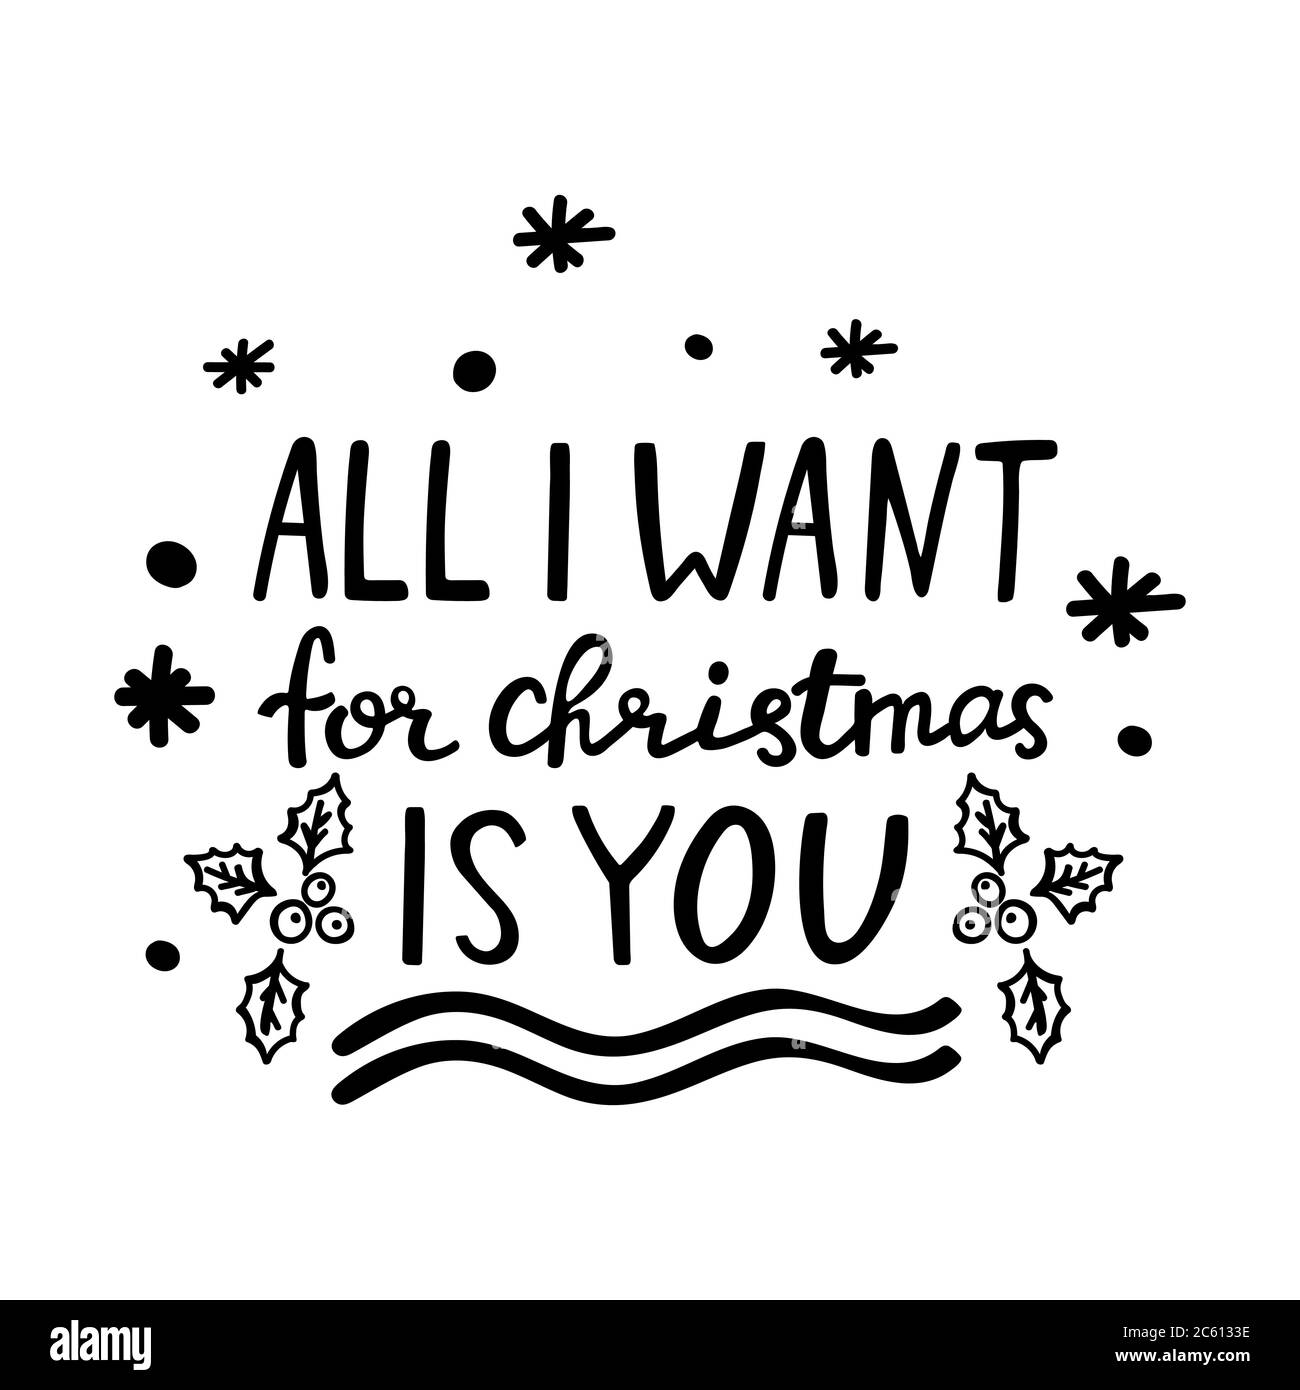 Hand lettering Christmas quote All I want for christmas is you. Holiday design element on white background. Xmas card with hand drawn sign. Stock Vector